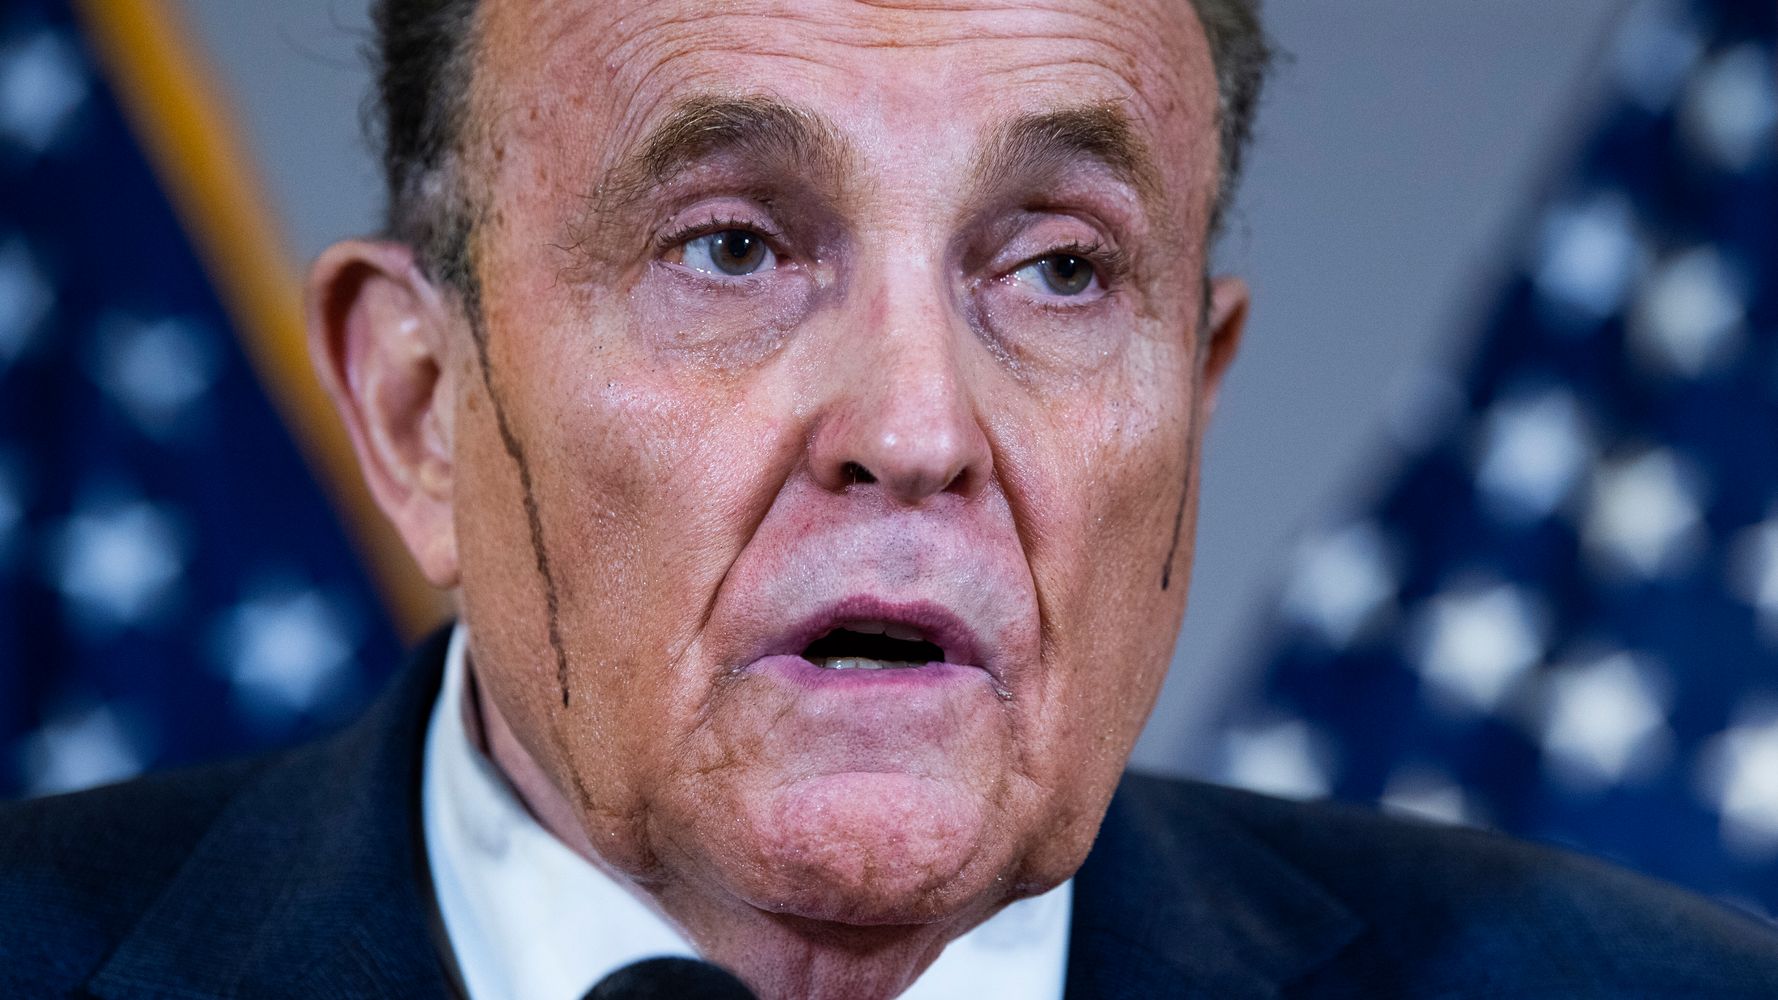 MSNBC Supercut Bashes Rudy Giuliani With Some Of His Most ‘Unhinged’ Election Rants